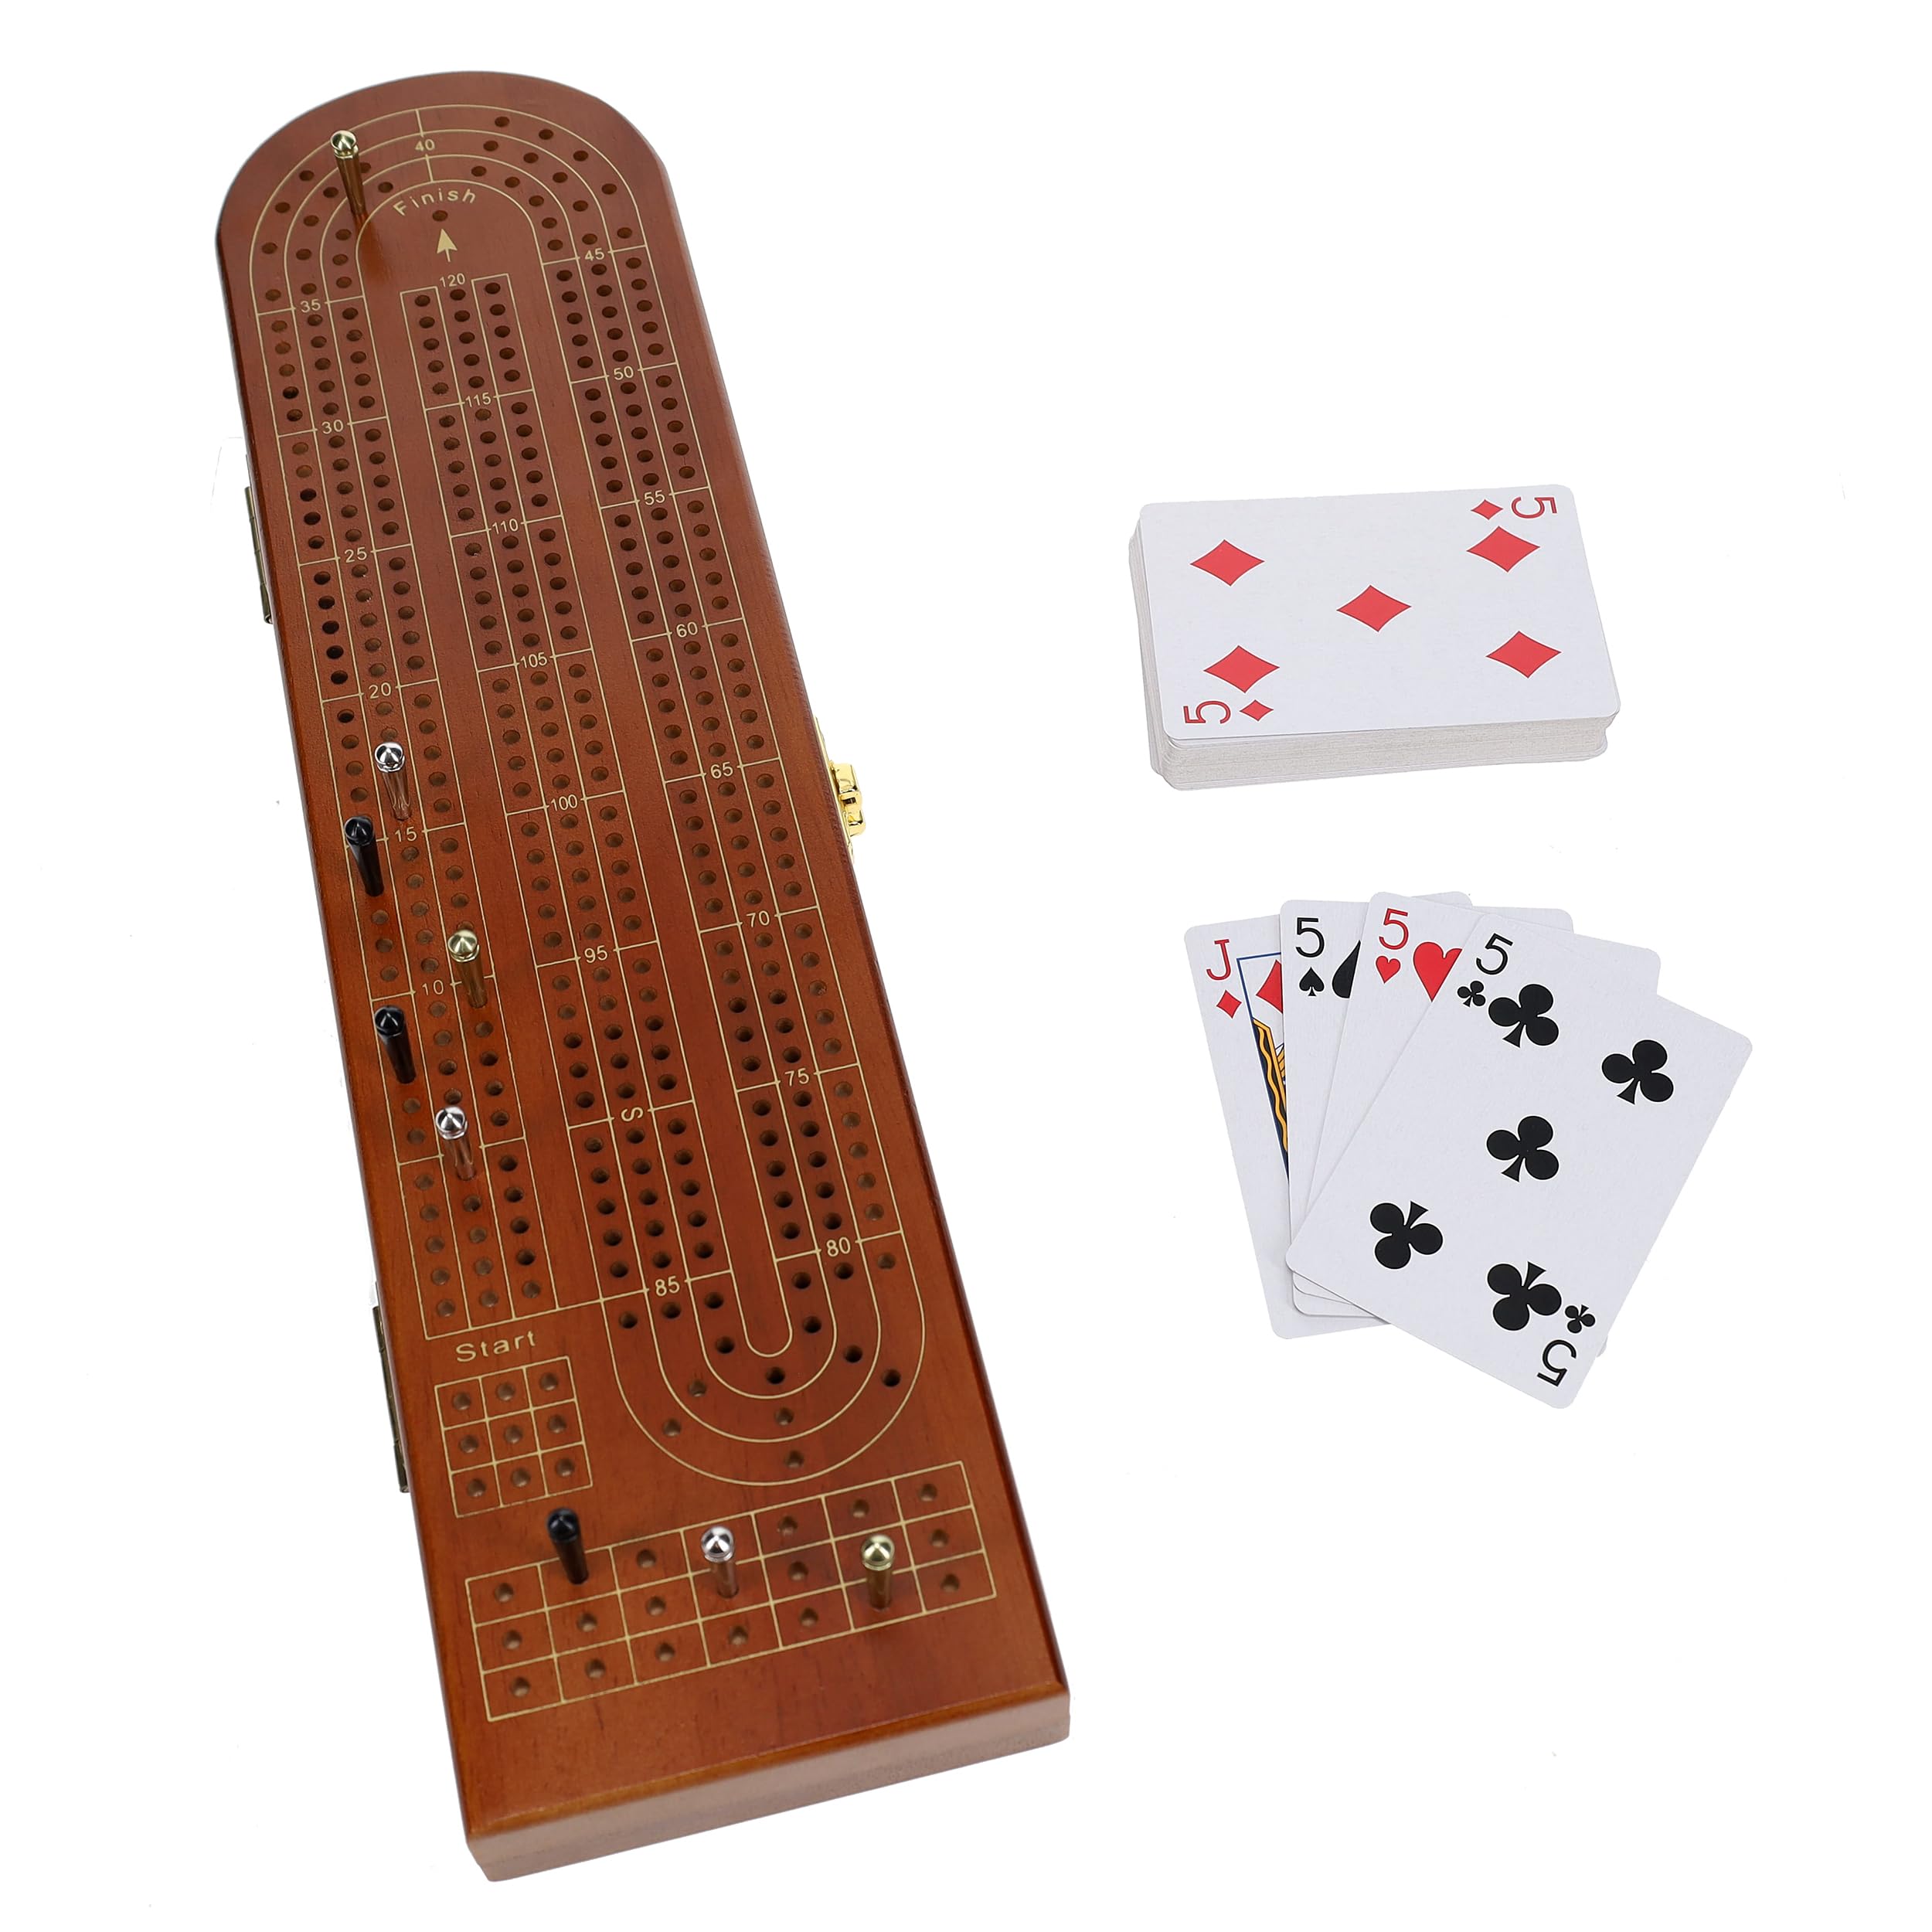 Pacific Shore Games Wooden Cribbage Board Game Set, Walnut Stained Continuous 3 Track for 2-3 Players, Card Storage